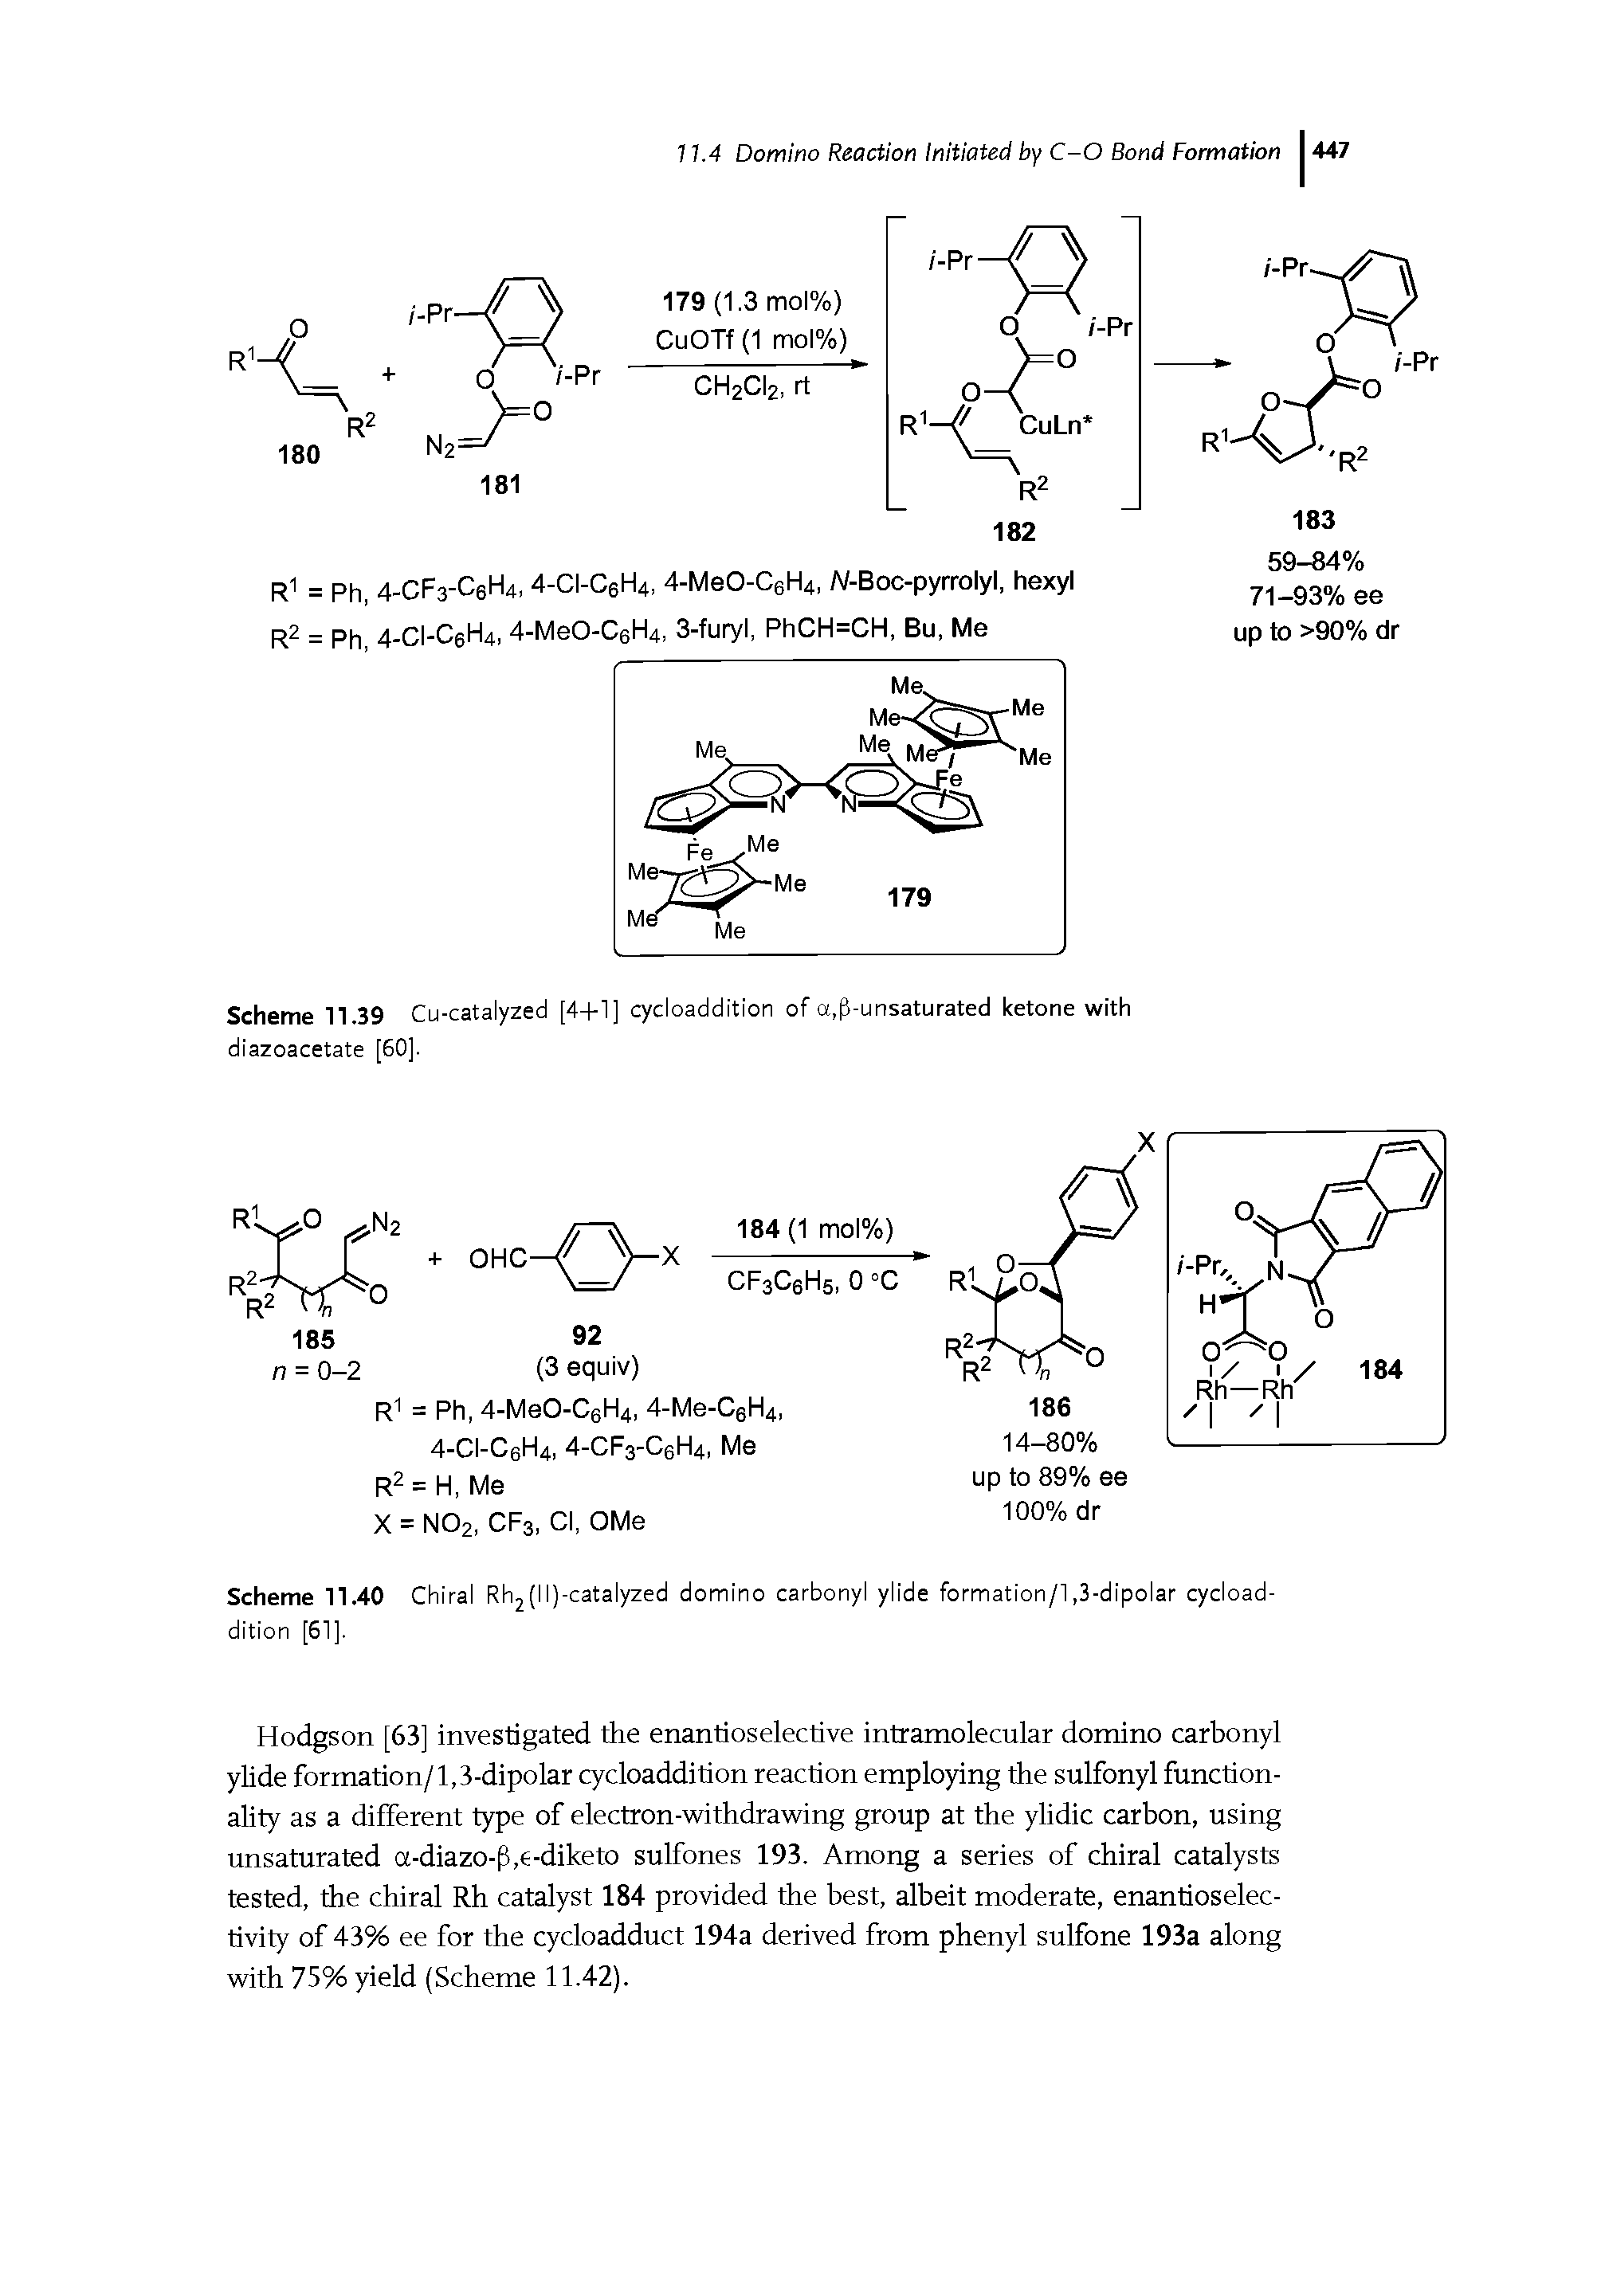 Scheme 11.40 Chiral Rh2(N)-catalyzed domino carbonyl ylide formation/l,3-dipolar cycloaddition [51].